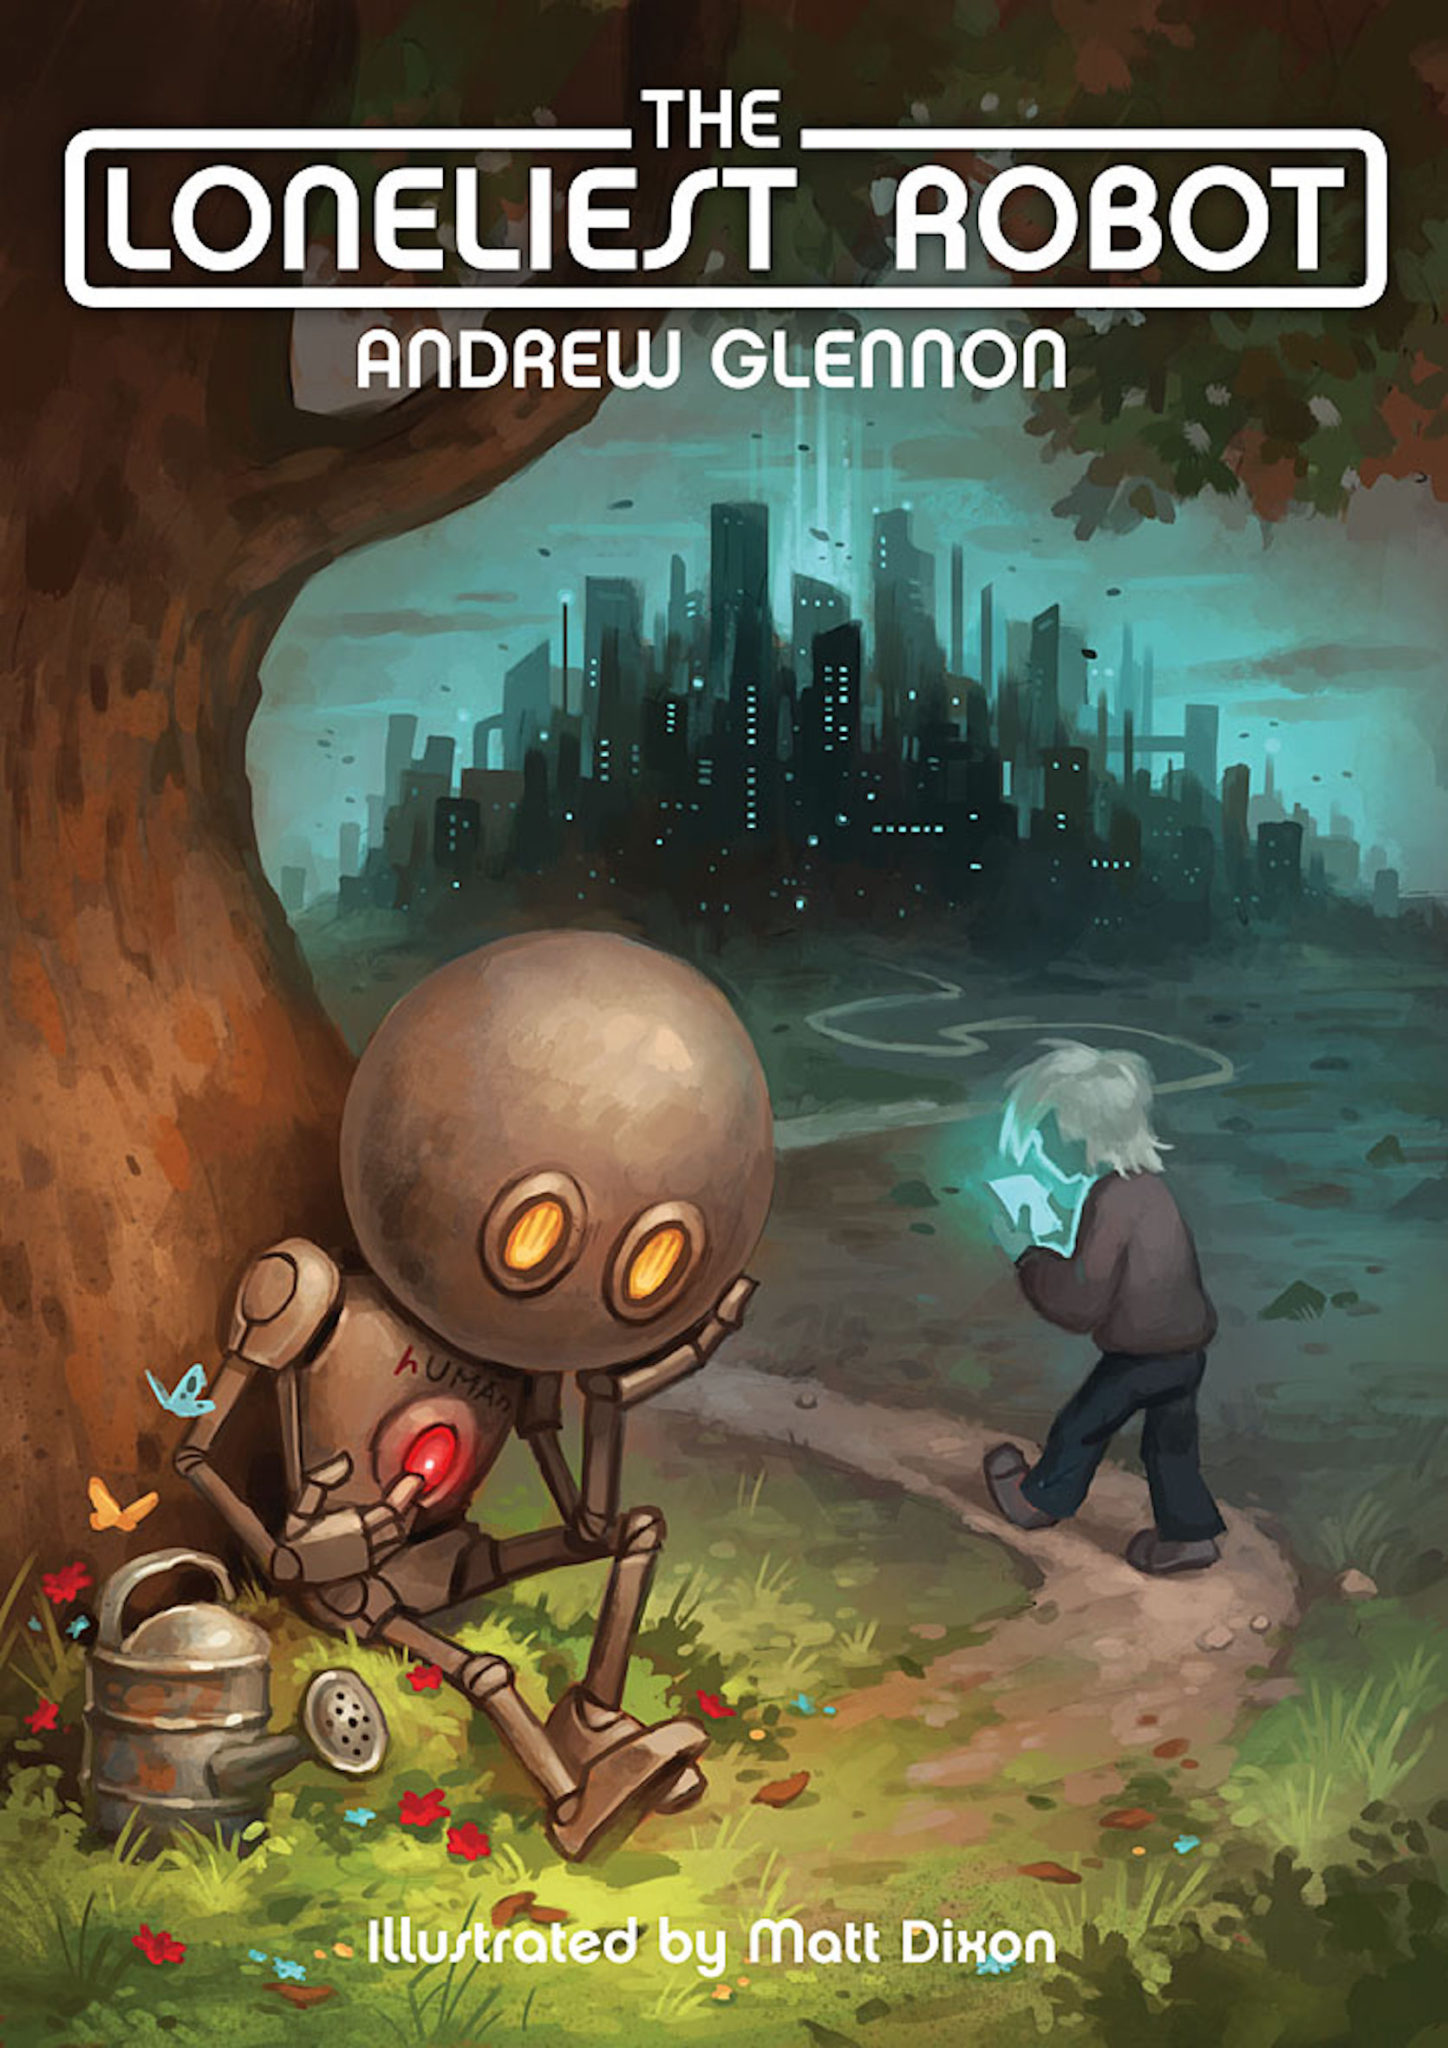 FREE: The Loneliest Robot by Andrew Glennon